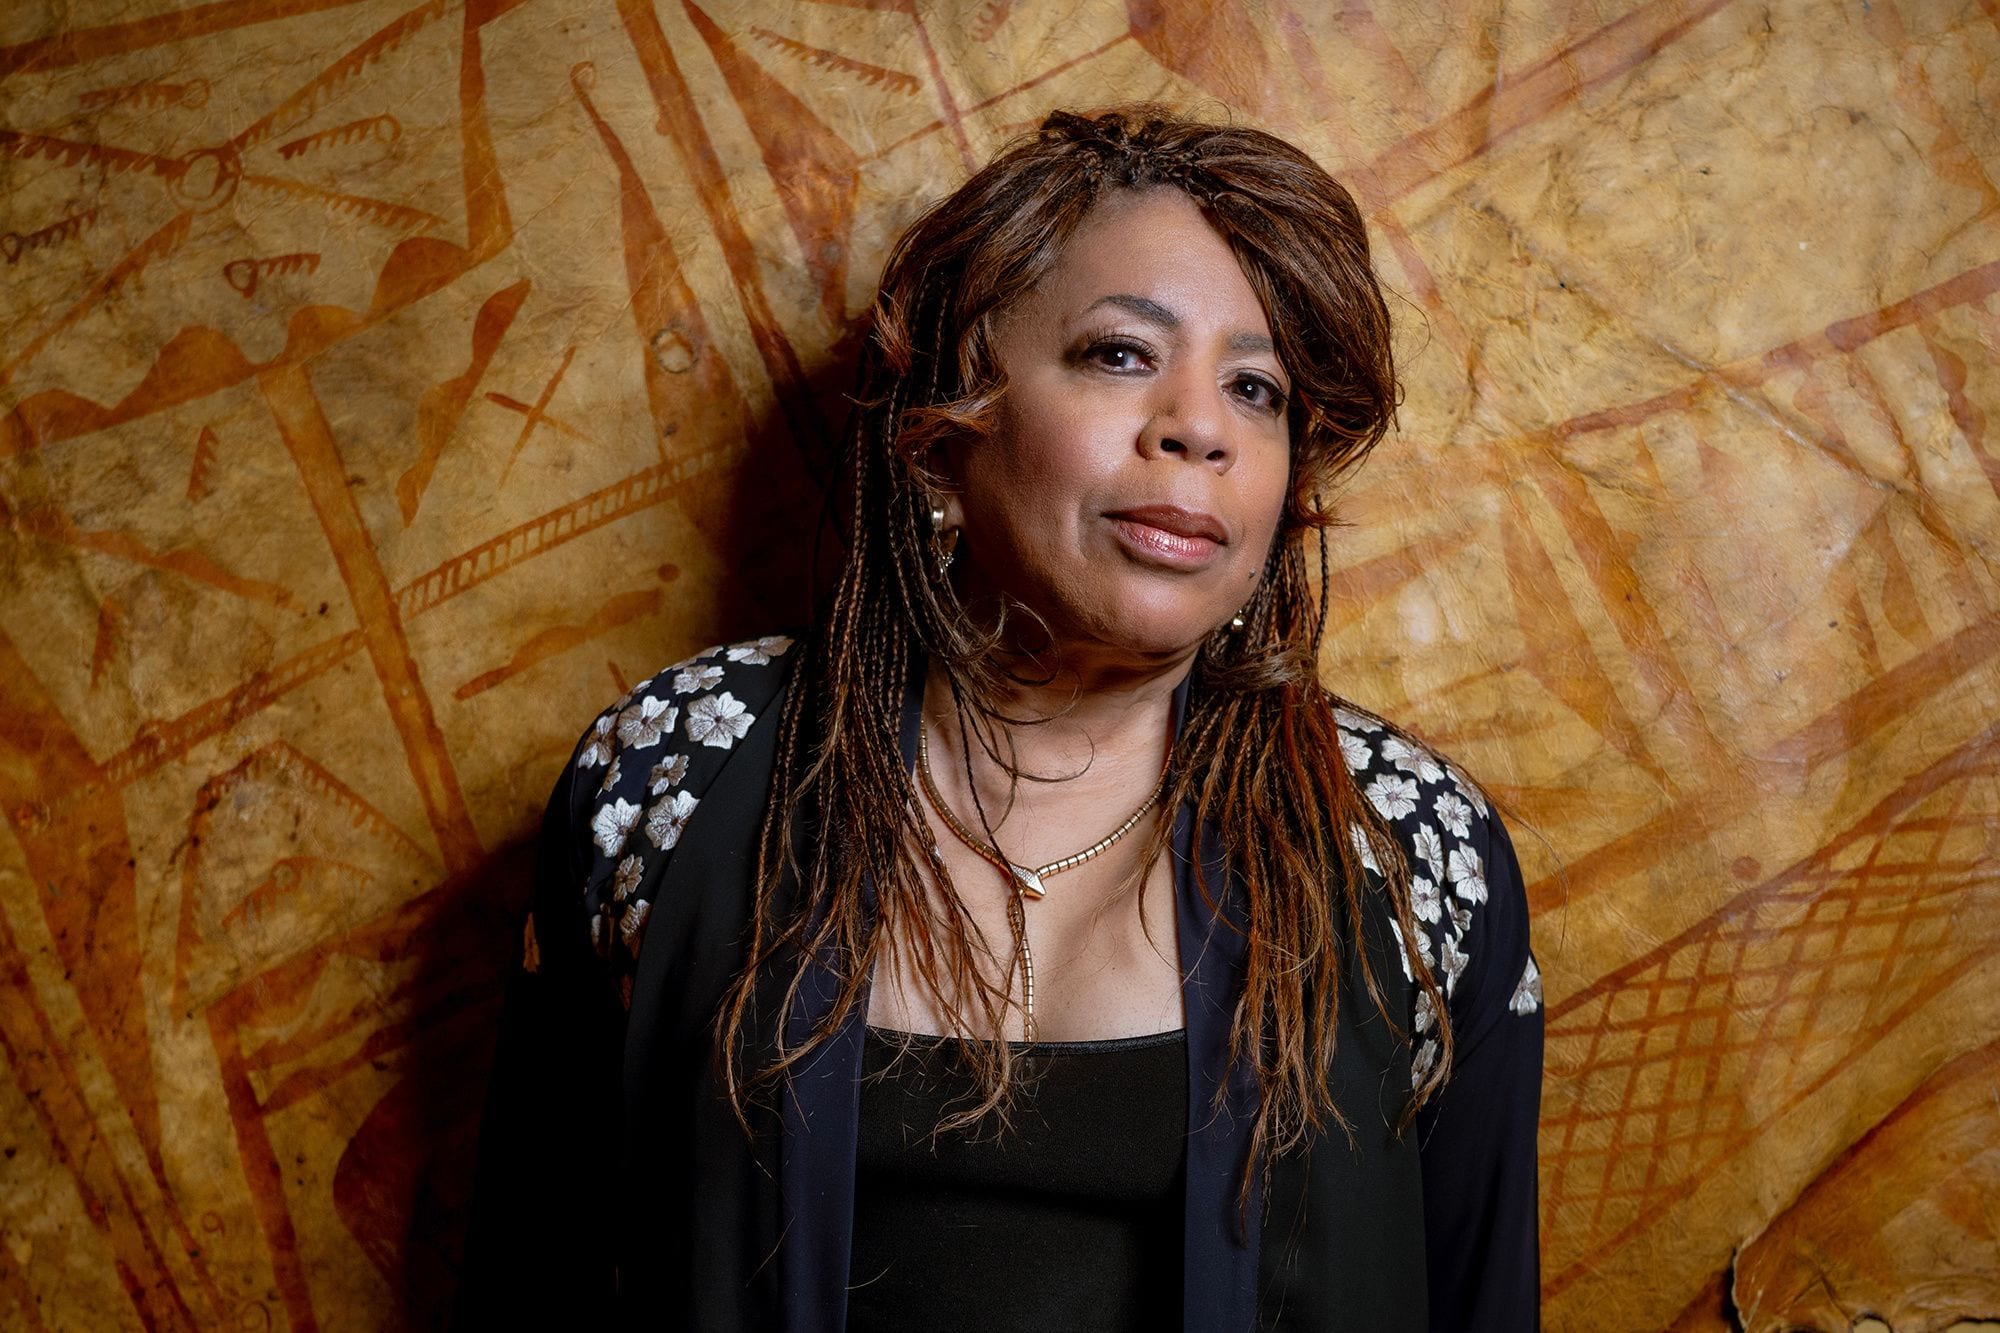 Making a Masterpiece: An Interview with Legendary Composer Valerie Simpson